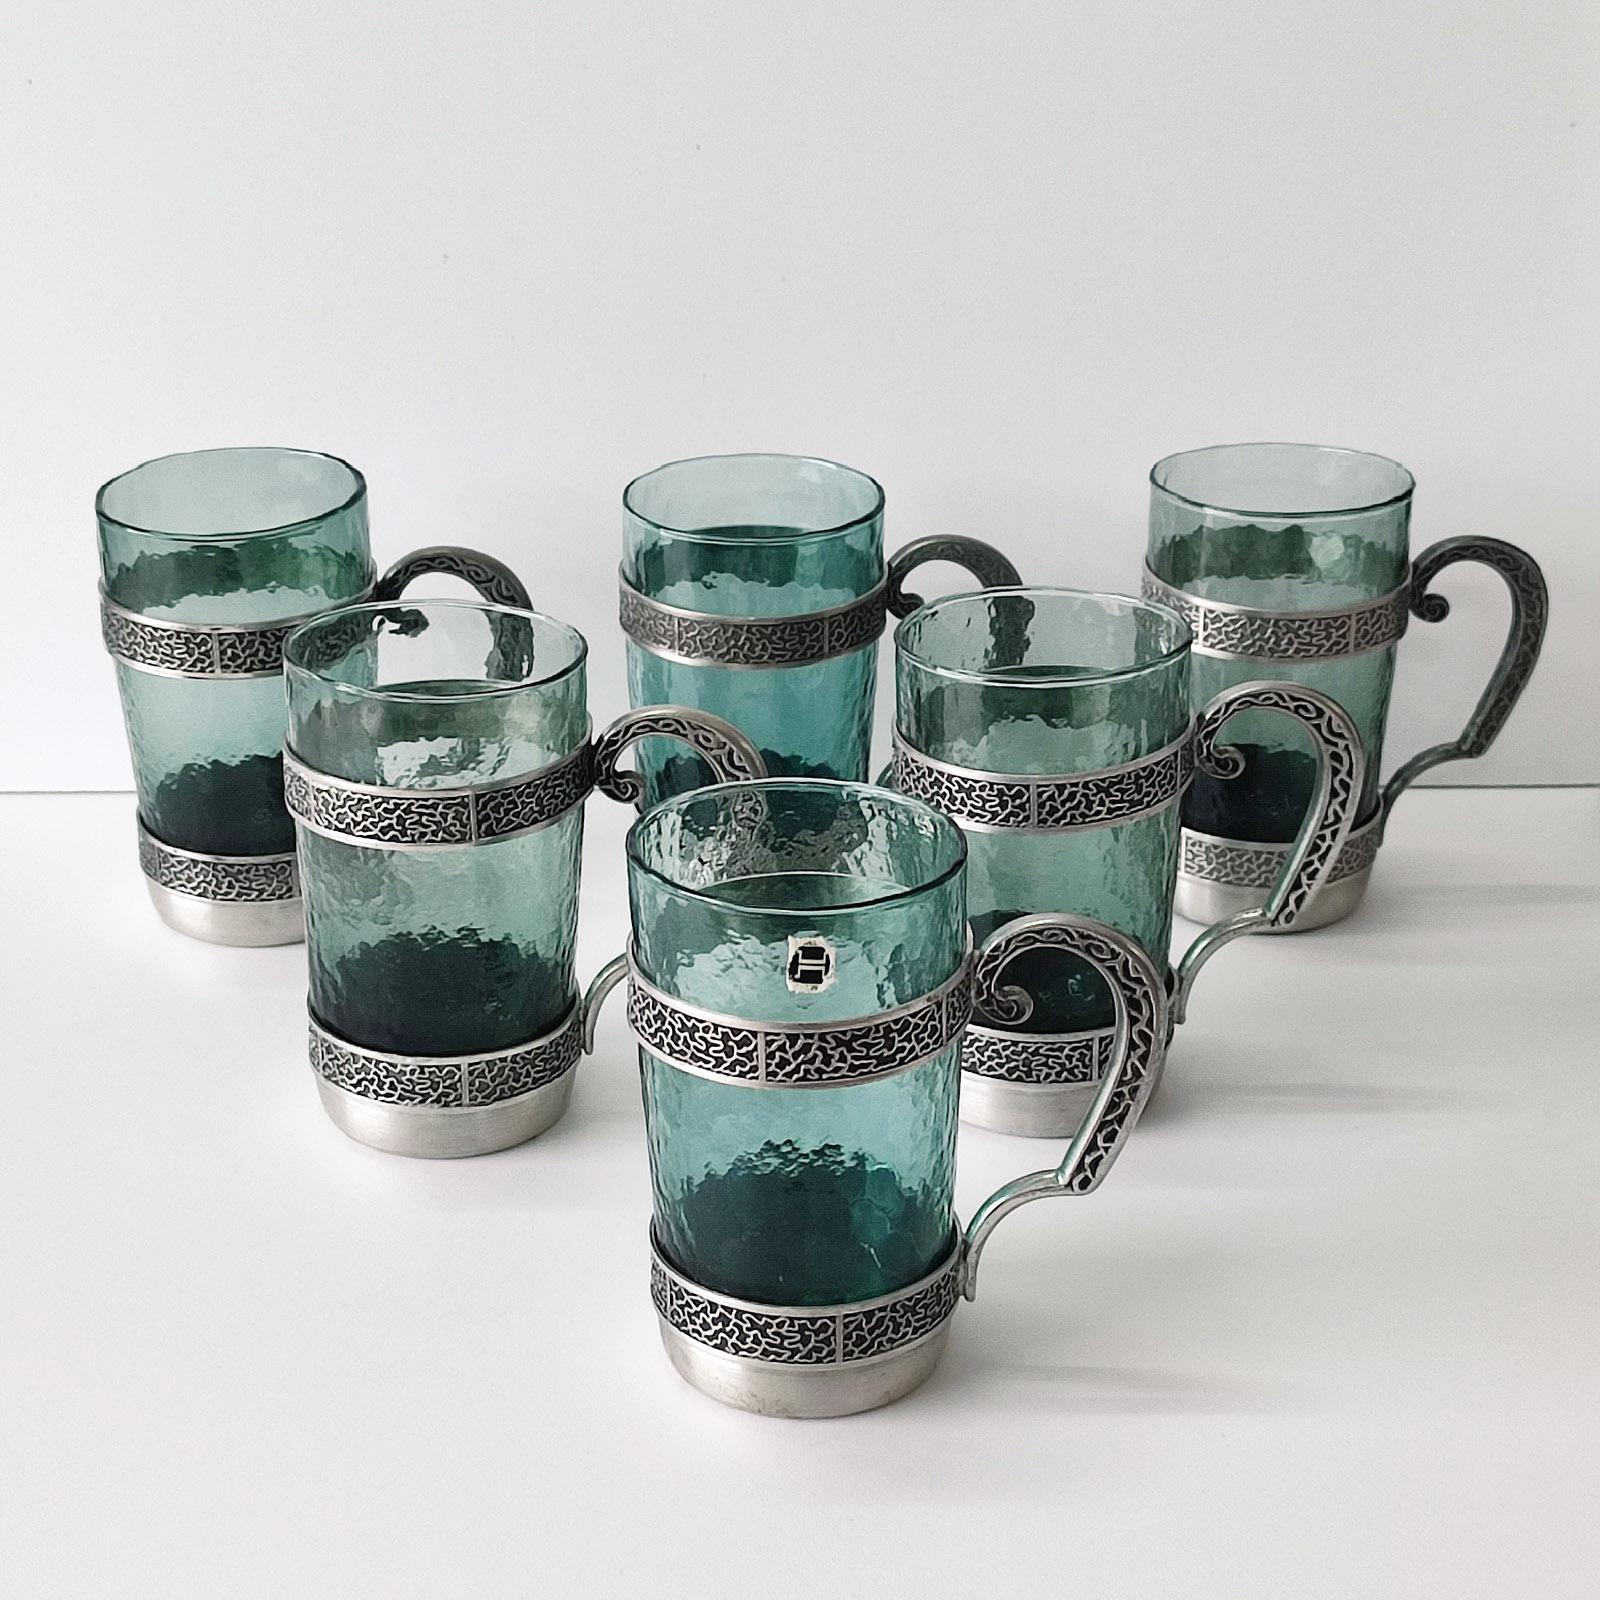 Art Deco set of 6 Mugs glass & Pewter cups Norway.
In very good used condition, barely used. Marked on the bottom 'ITB NORWAY TINN' and 99.
Dimensions: 11 x 7 x 12cm.
Beautiful combination of stylized Art Deco pattern on the pewter support with